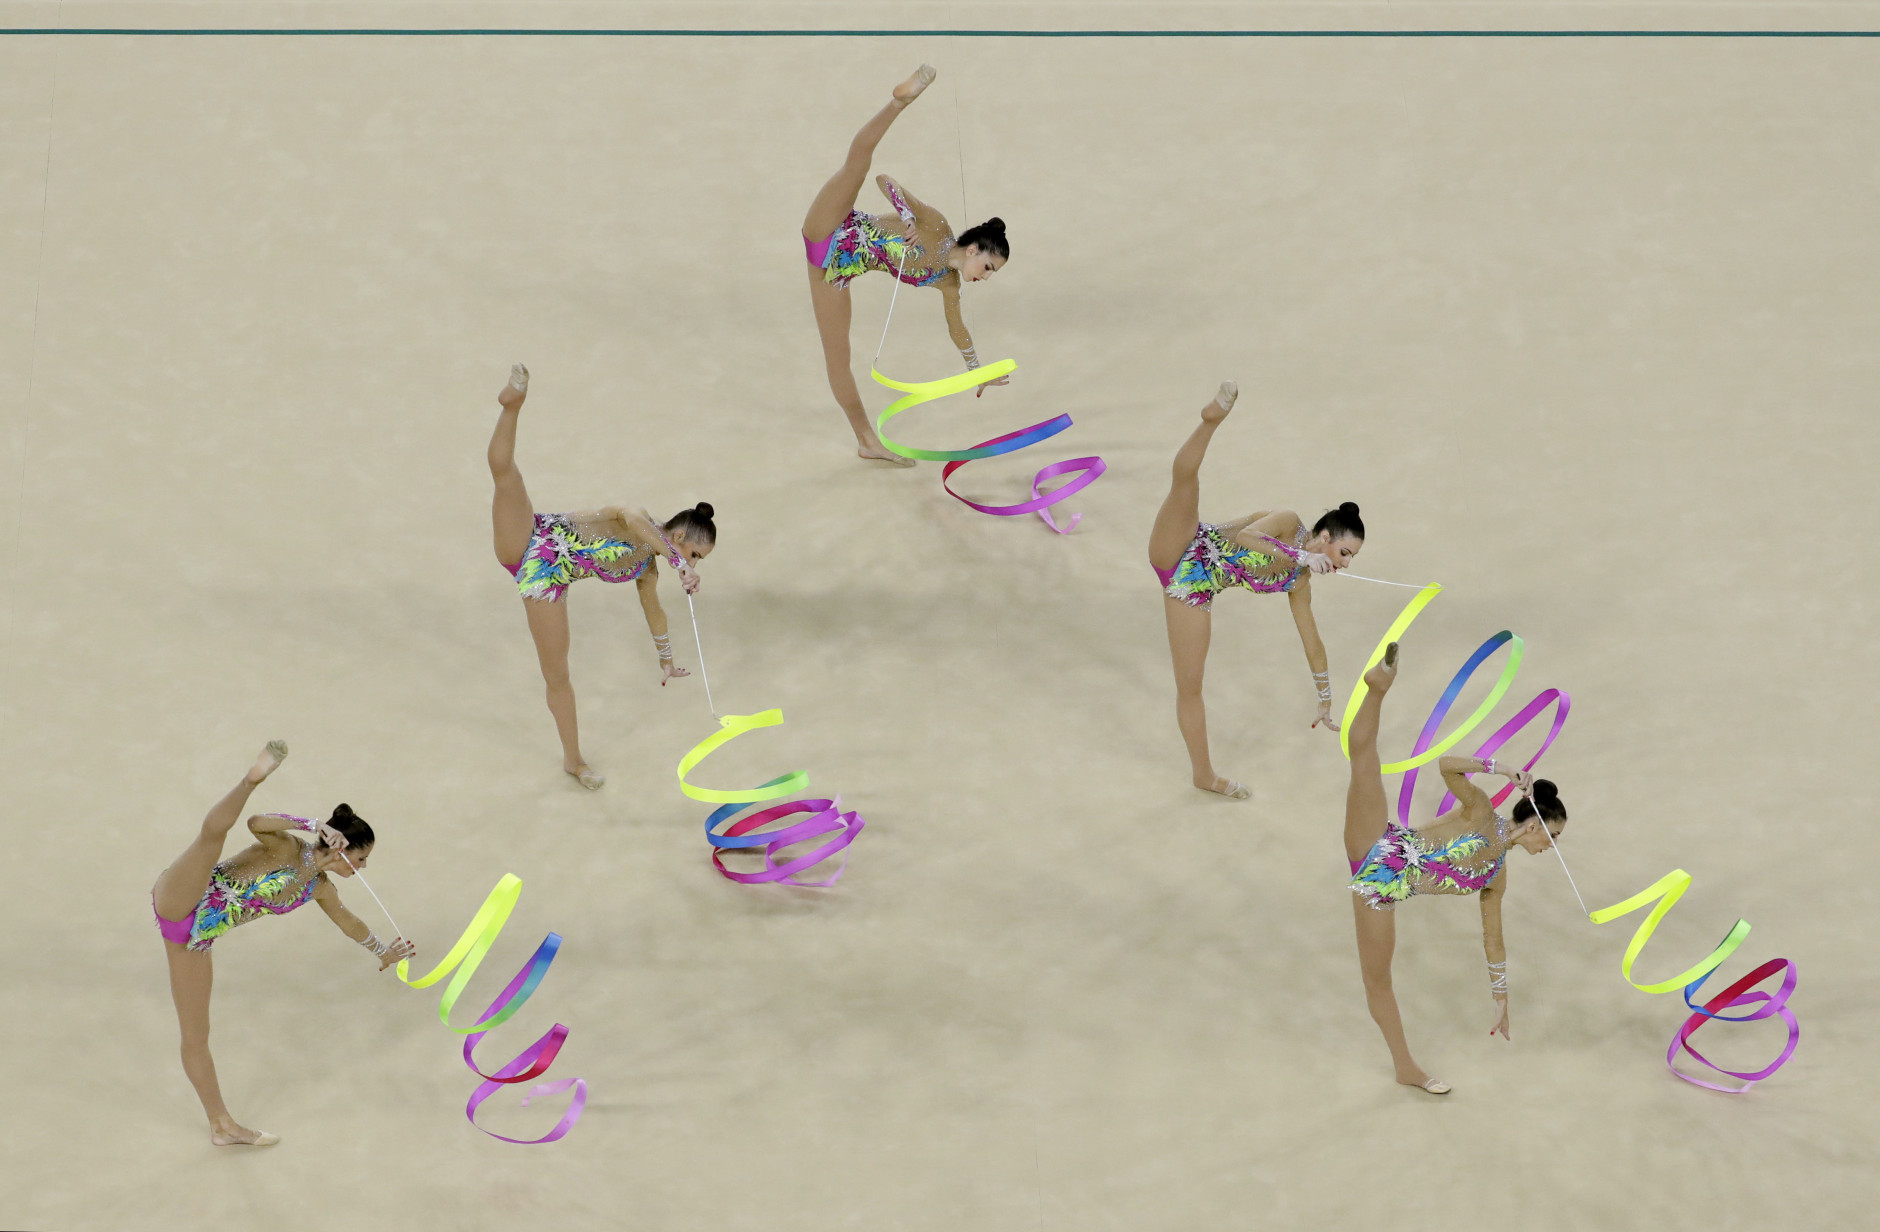 Team Spain performs during the rhythmic gymnastics group all-around final at the 2016 Summer Olympics at the Olympic stadium in Rio de Janeiro, Brazil, Sunday, Aug. 21, 2016. (AP Photo/Dmitri Lovetsky)